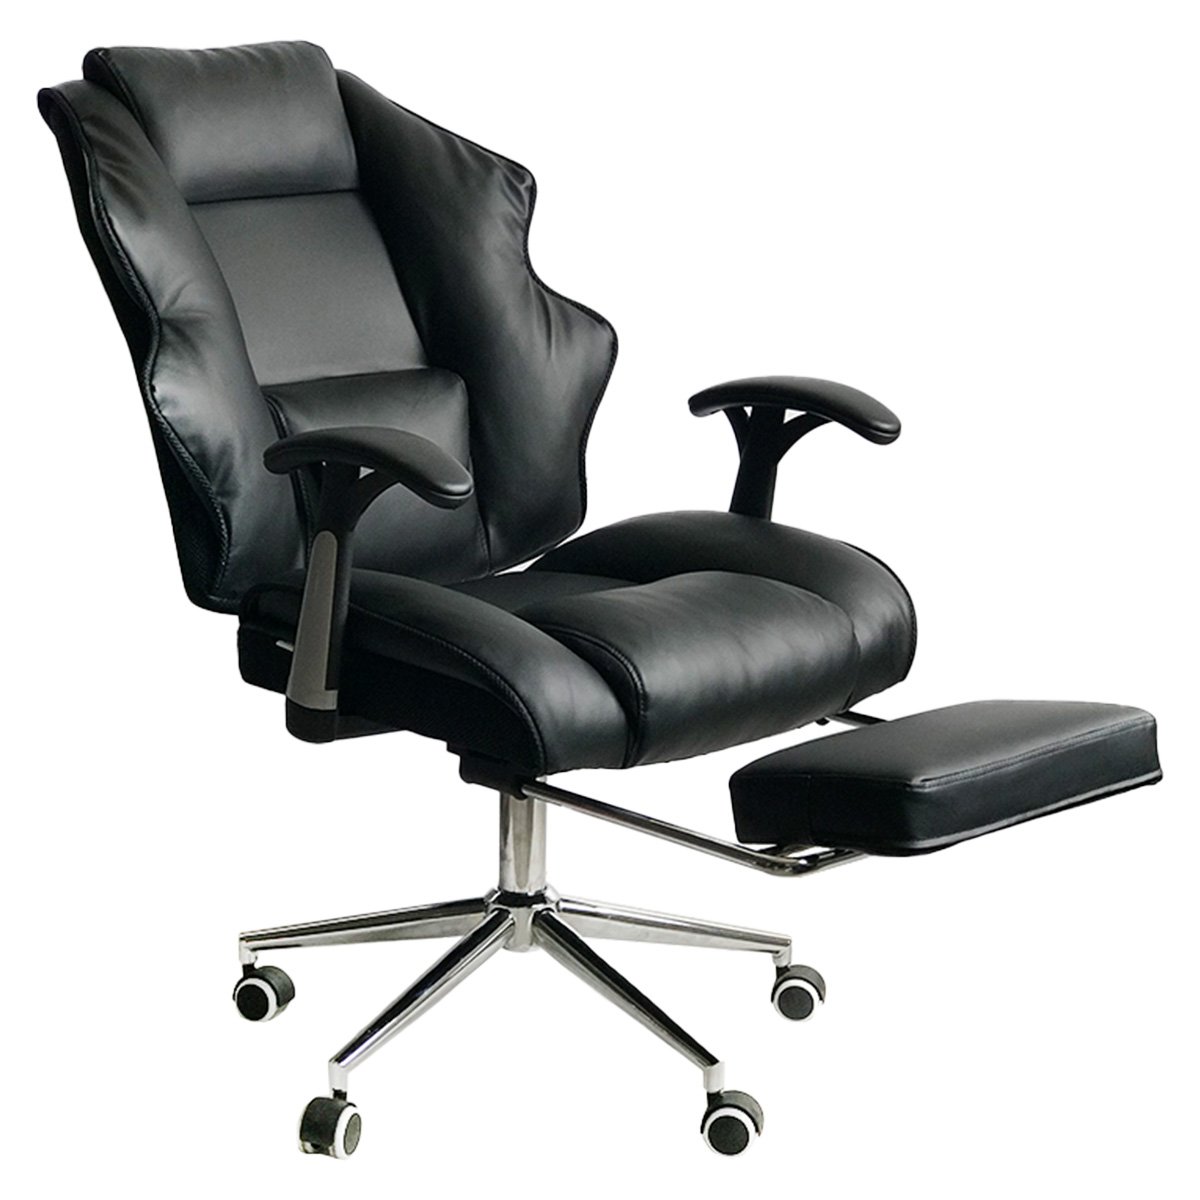 Faux Leather High Back Reclining Executive Office Chair w/ Stool Black 2